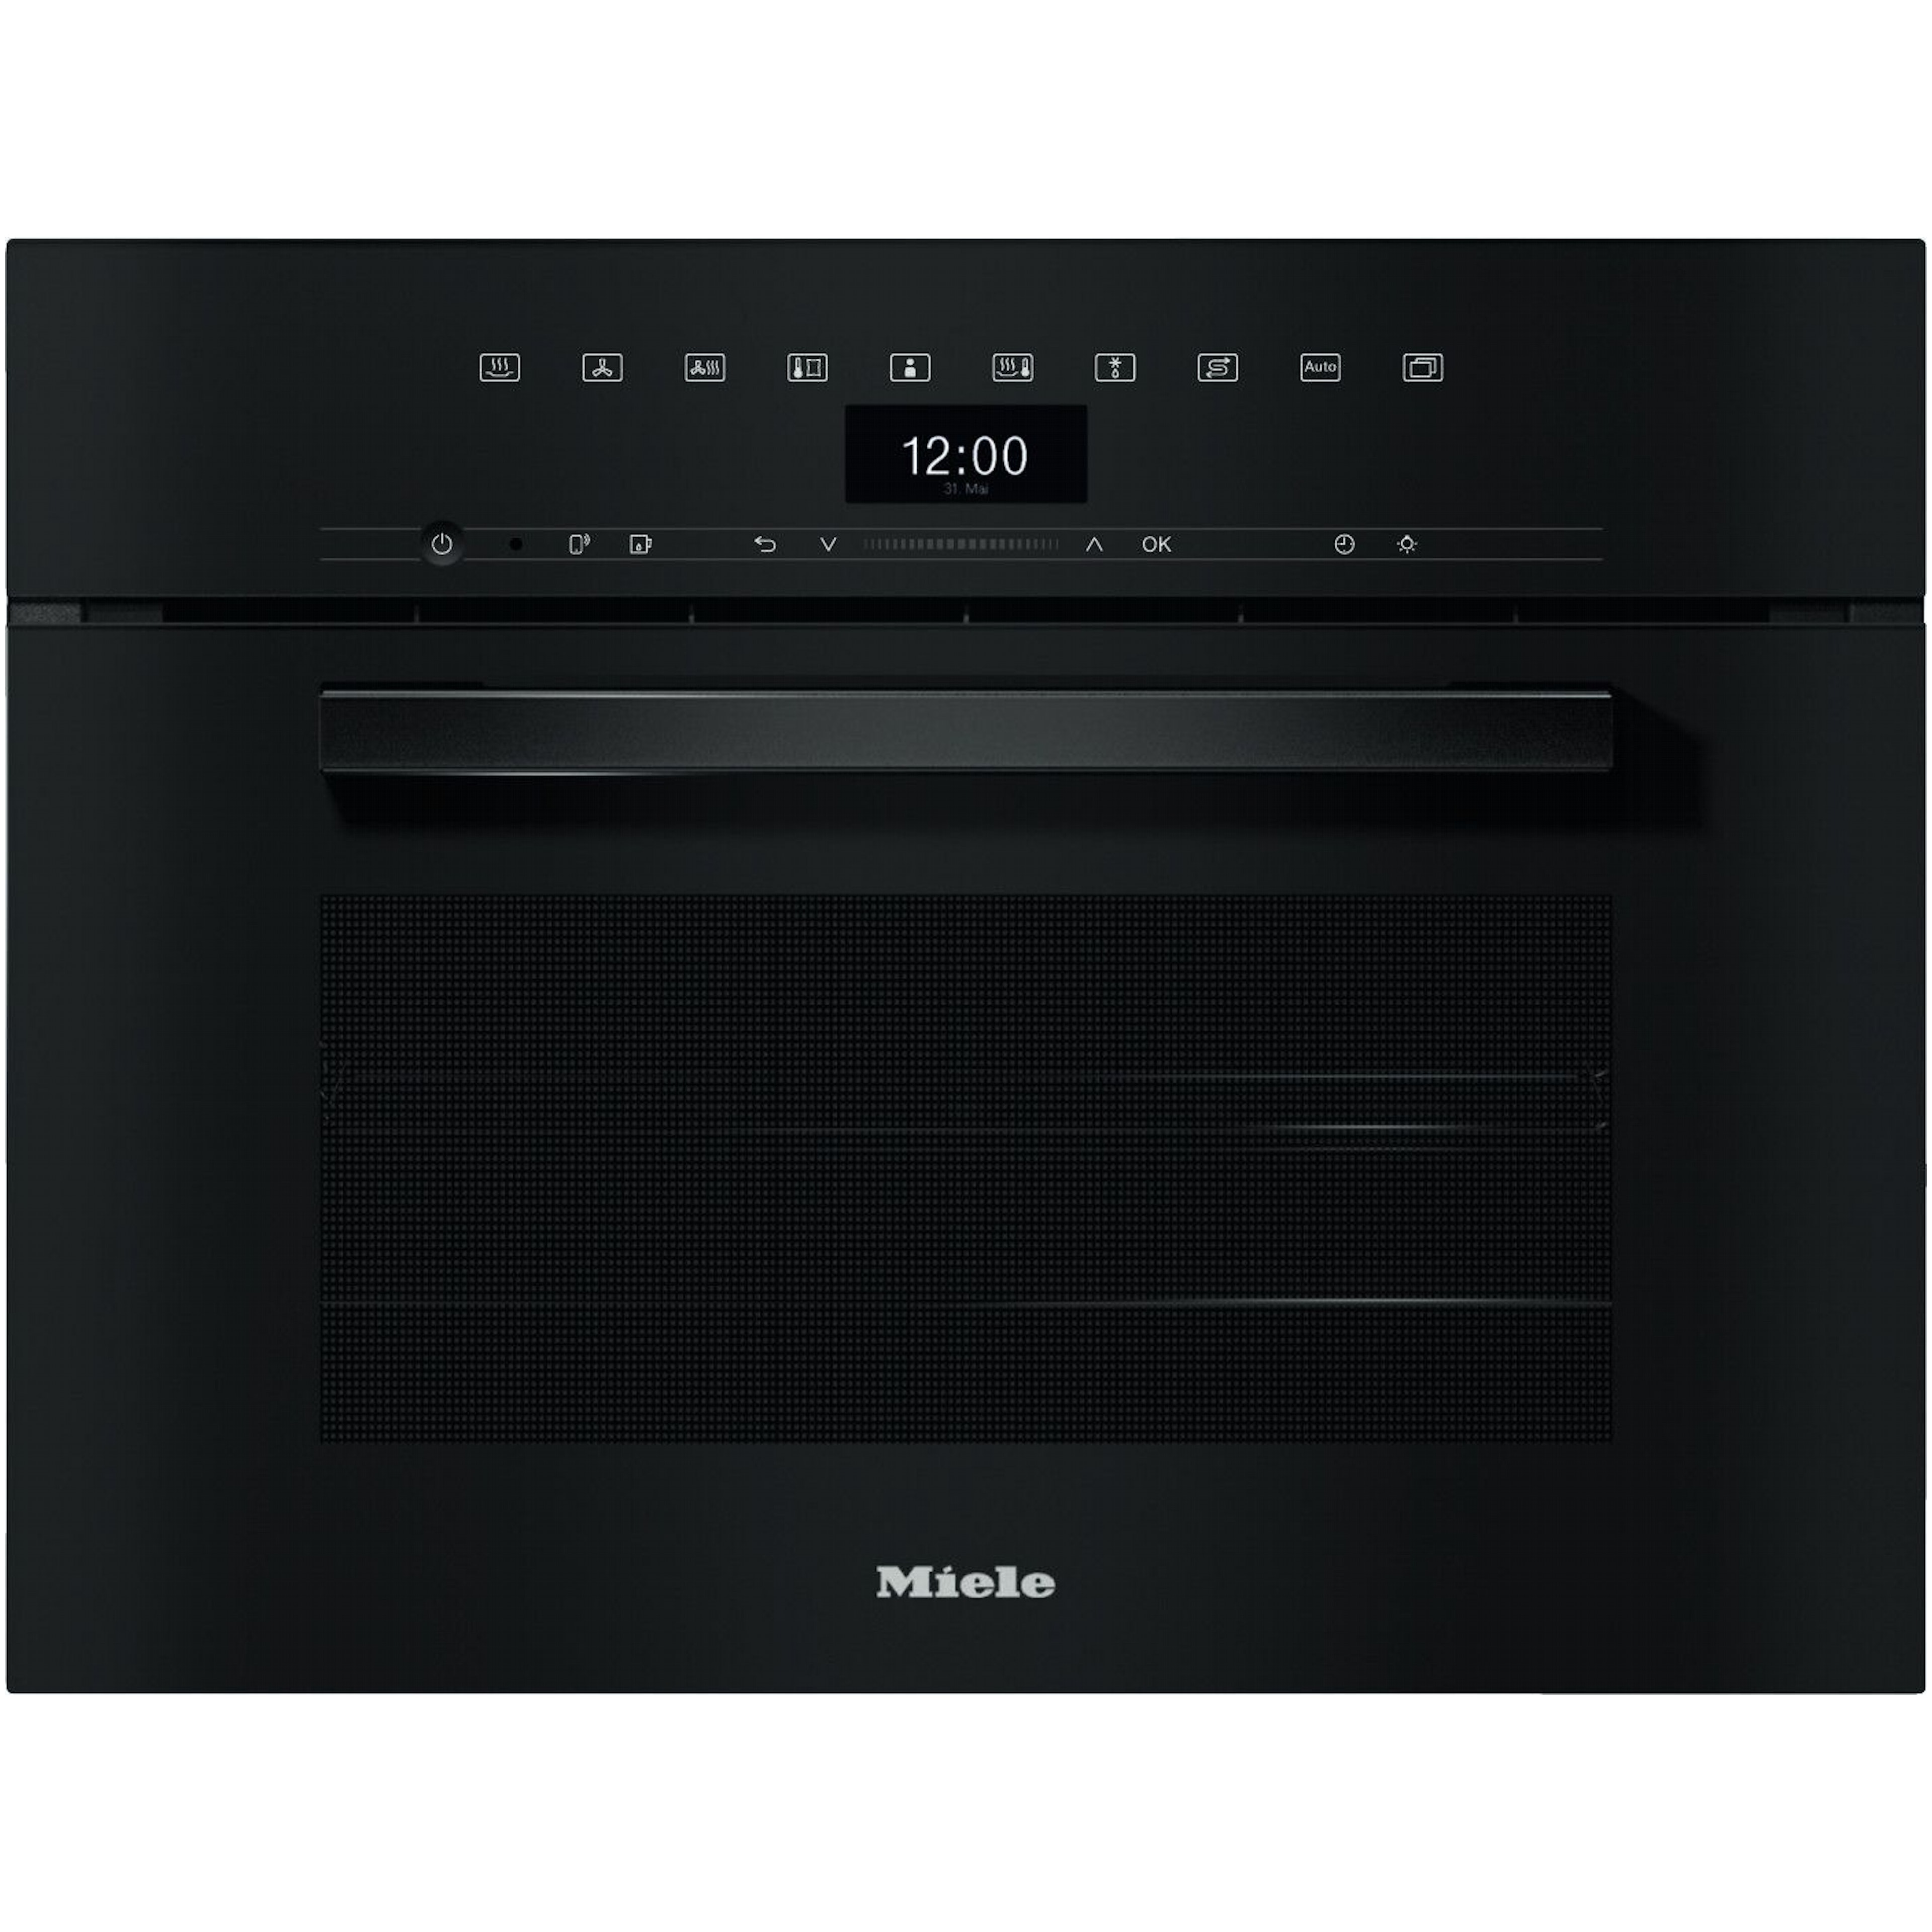 Miele DGC7445HCPROOBSW